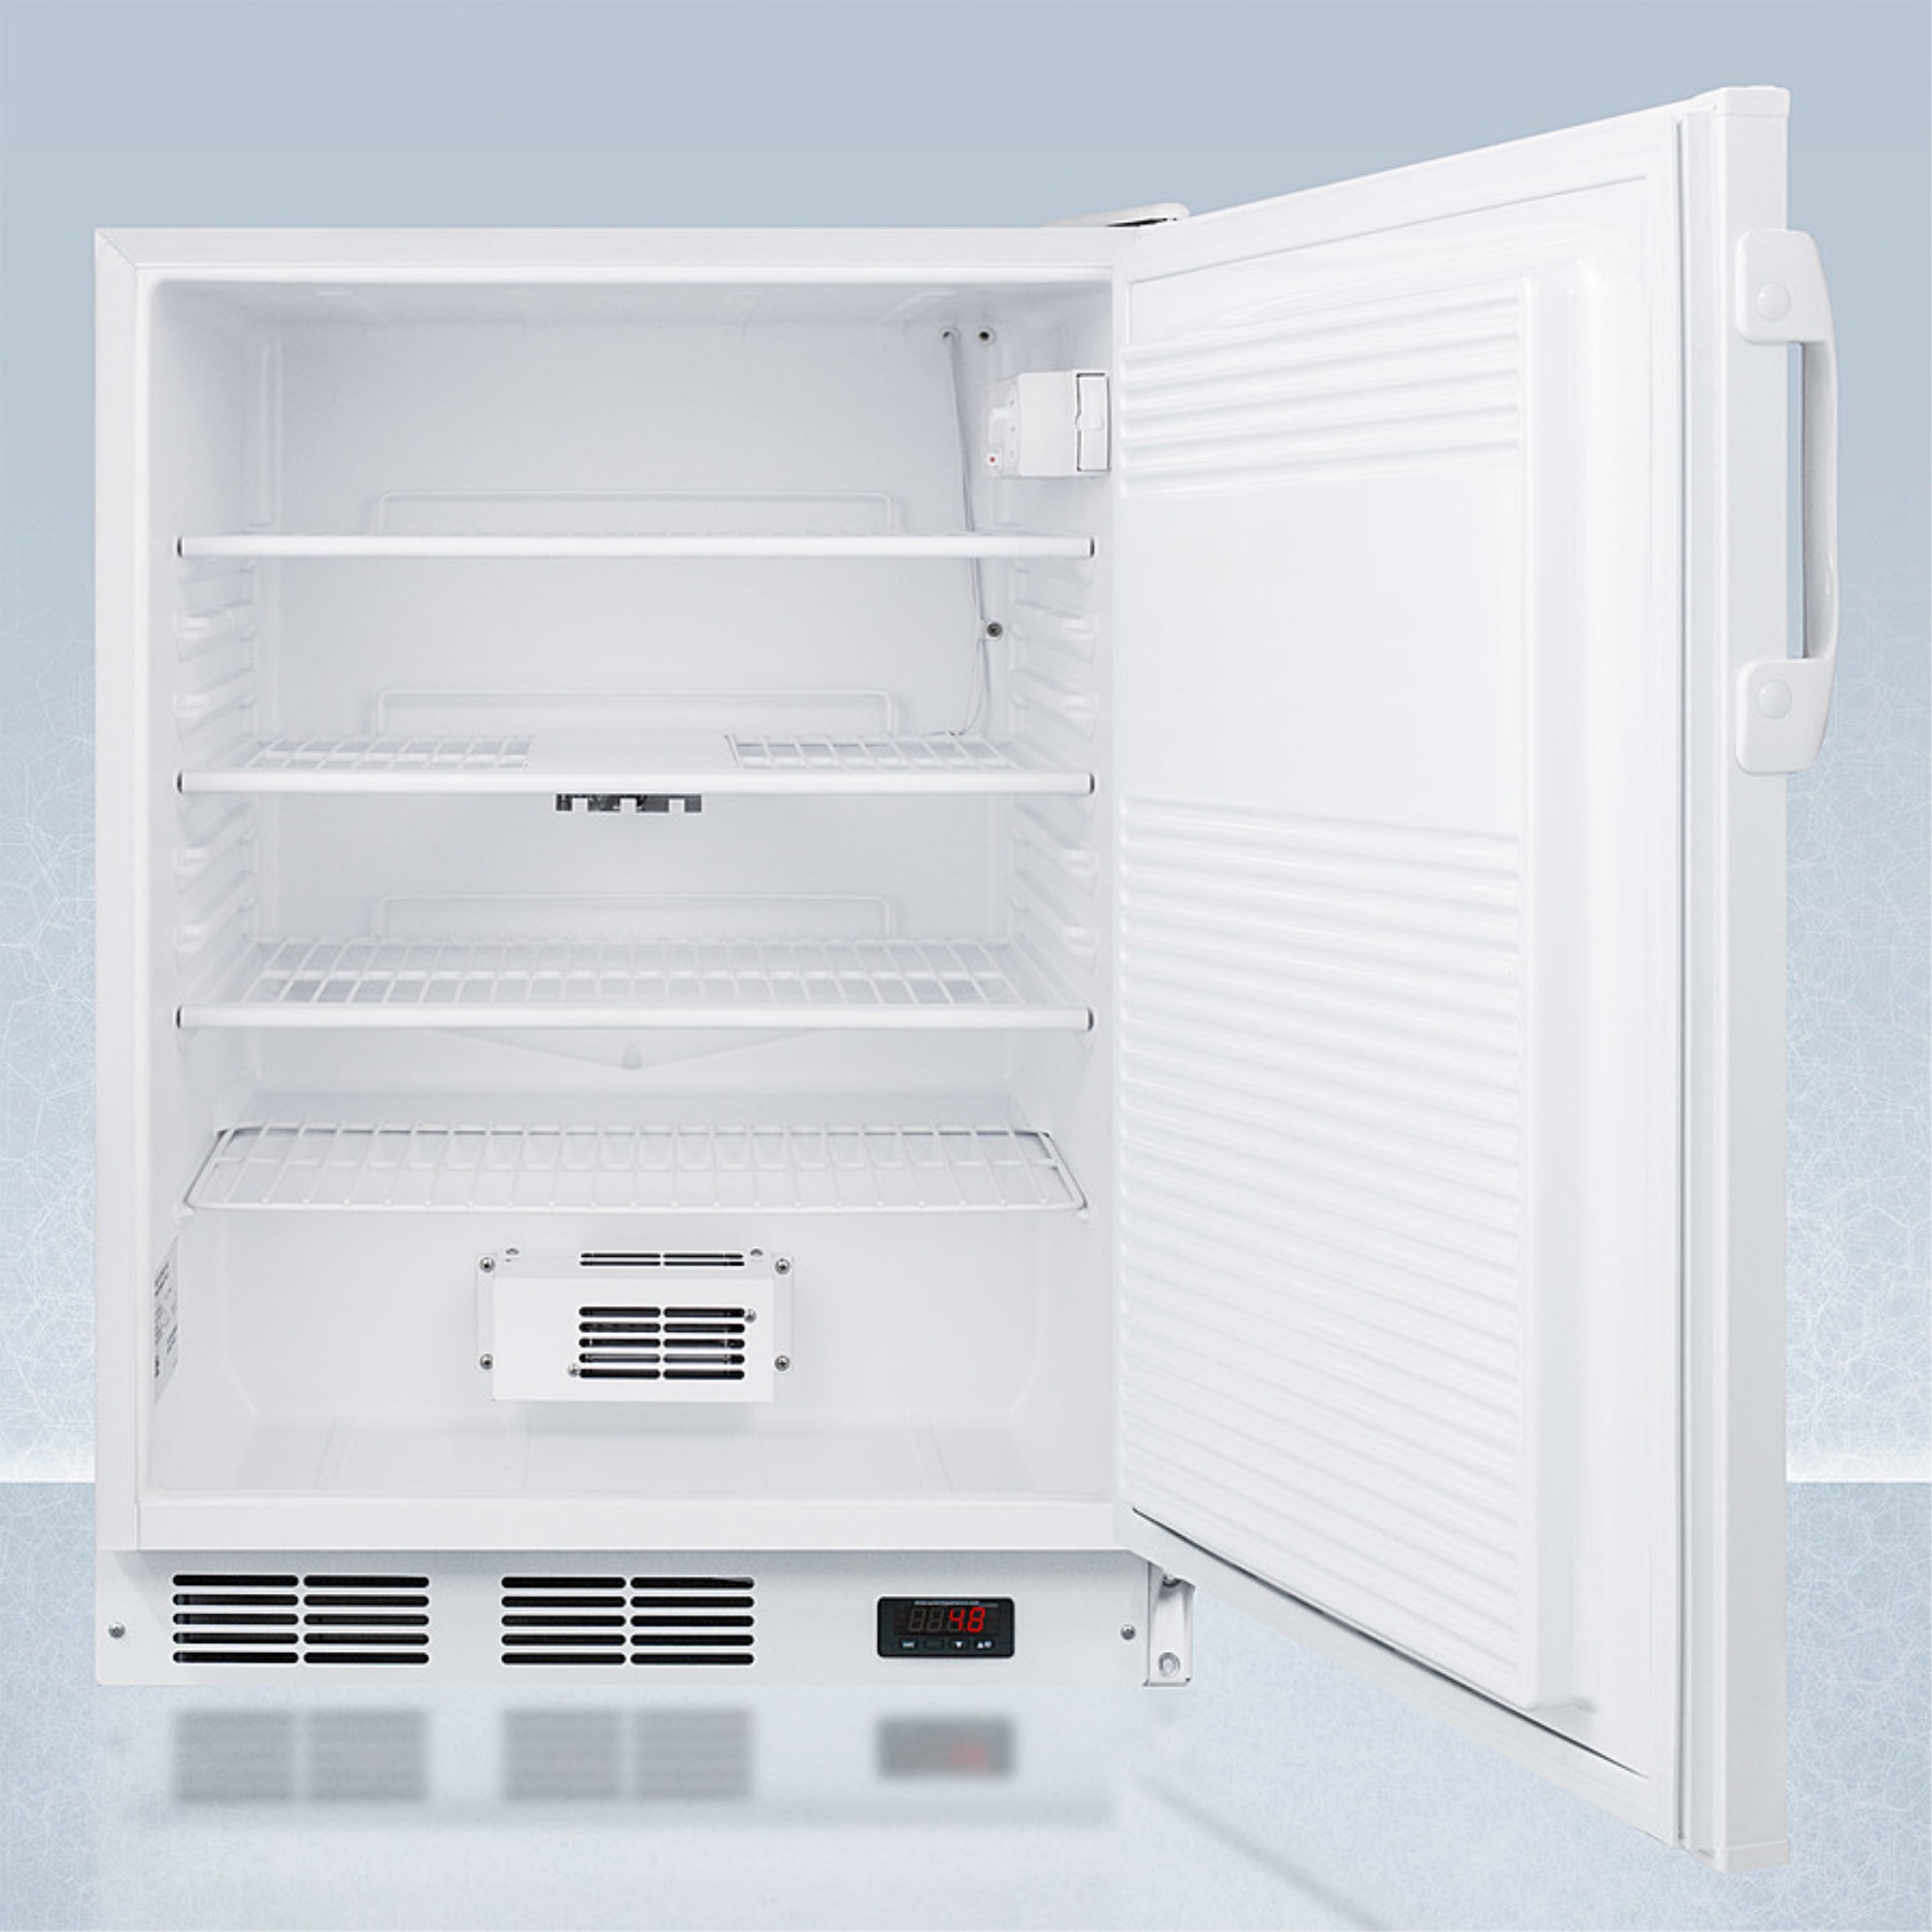 AccuCold ADA compliant 24" wide auto defrost commercial all-refrigerator with lock, digital thermostat, internal fan, and access port f